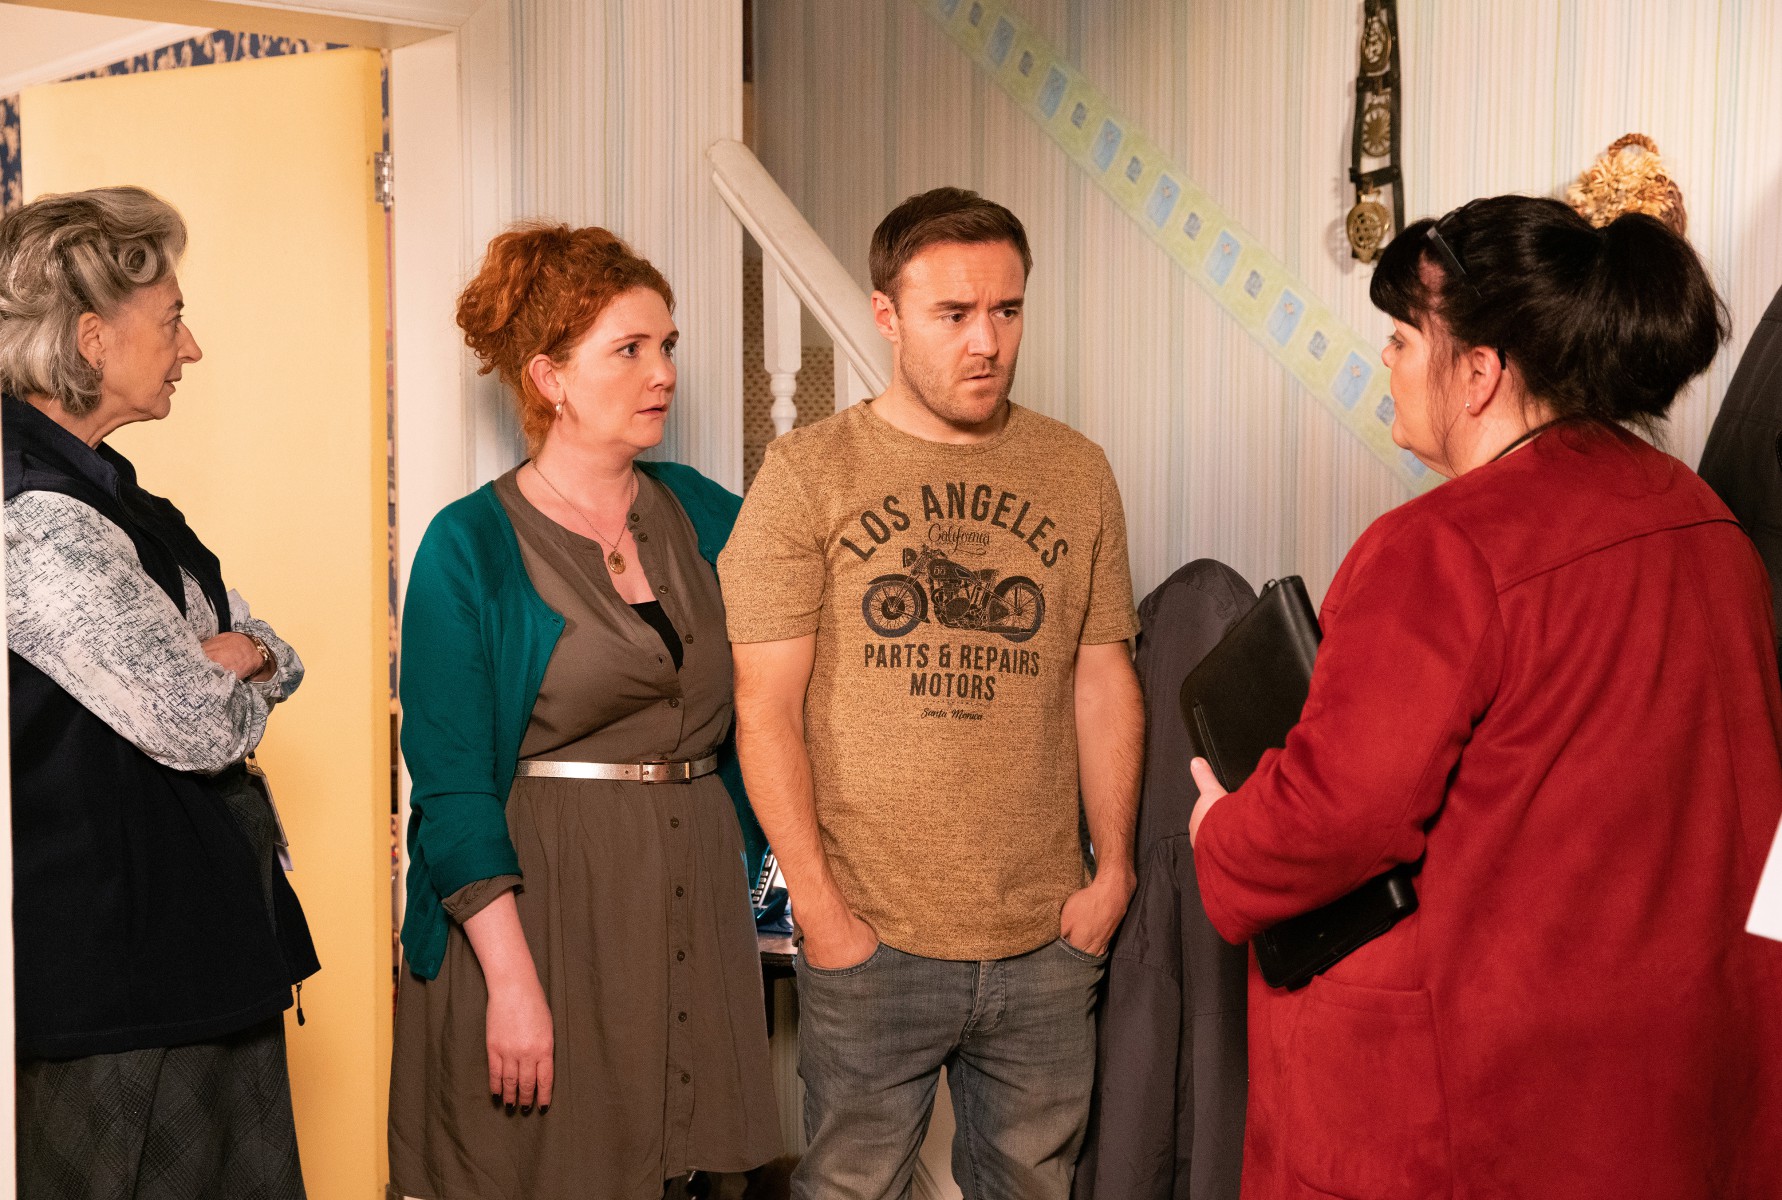 The social worker says Fiz will have to move out while the investigation continues in Corrie